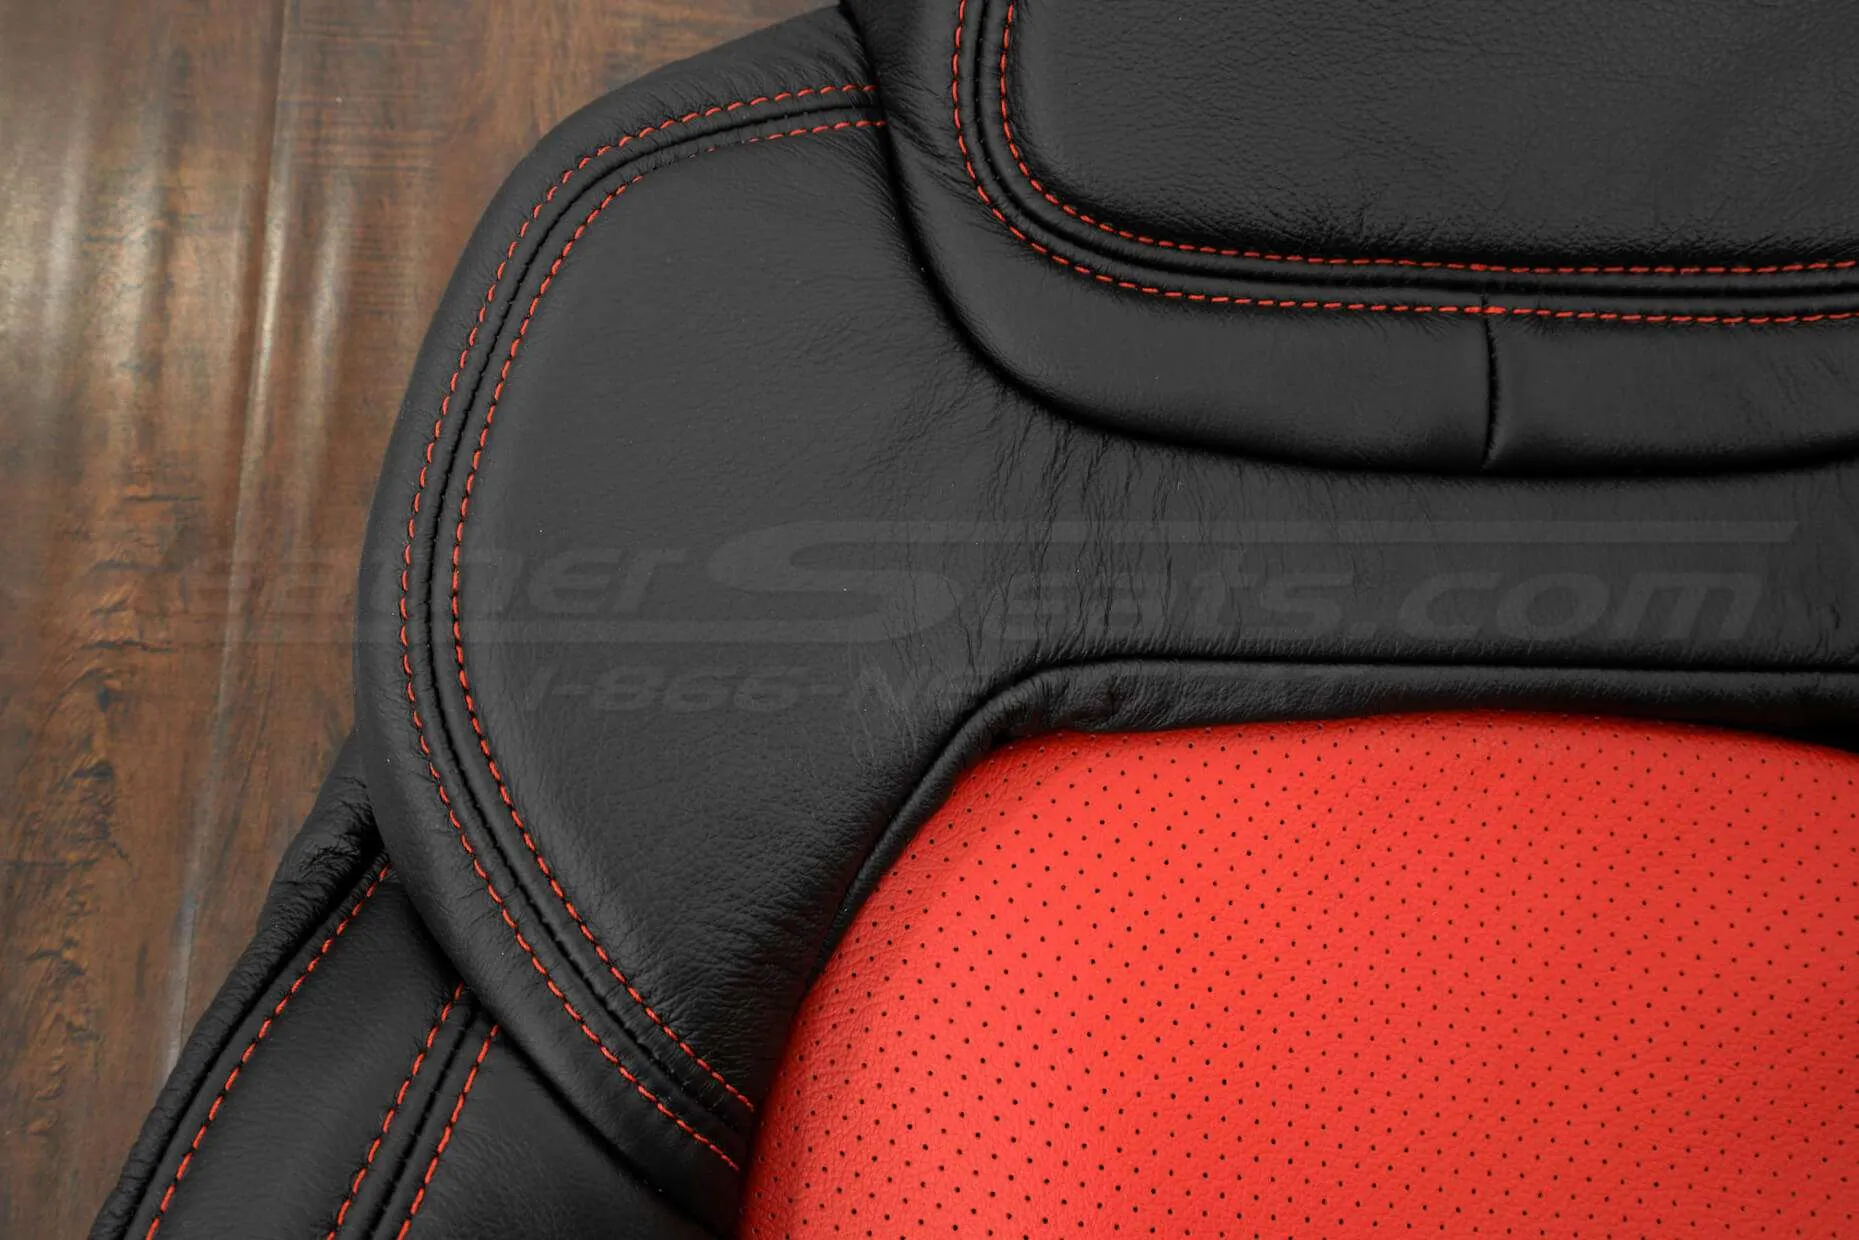 05-13 Chevrolet Corvette Upholstery Kit - Black & Bright Red - Headrest & Side double-stitching and perforation